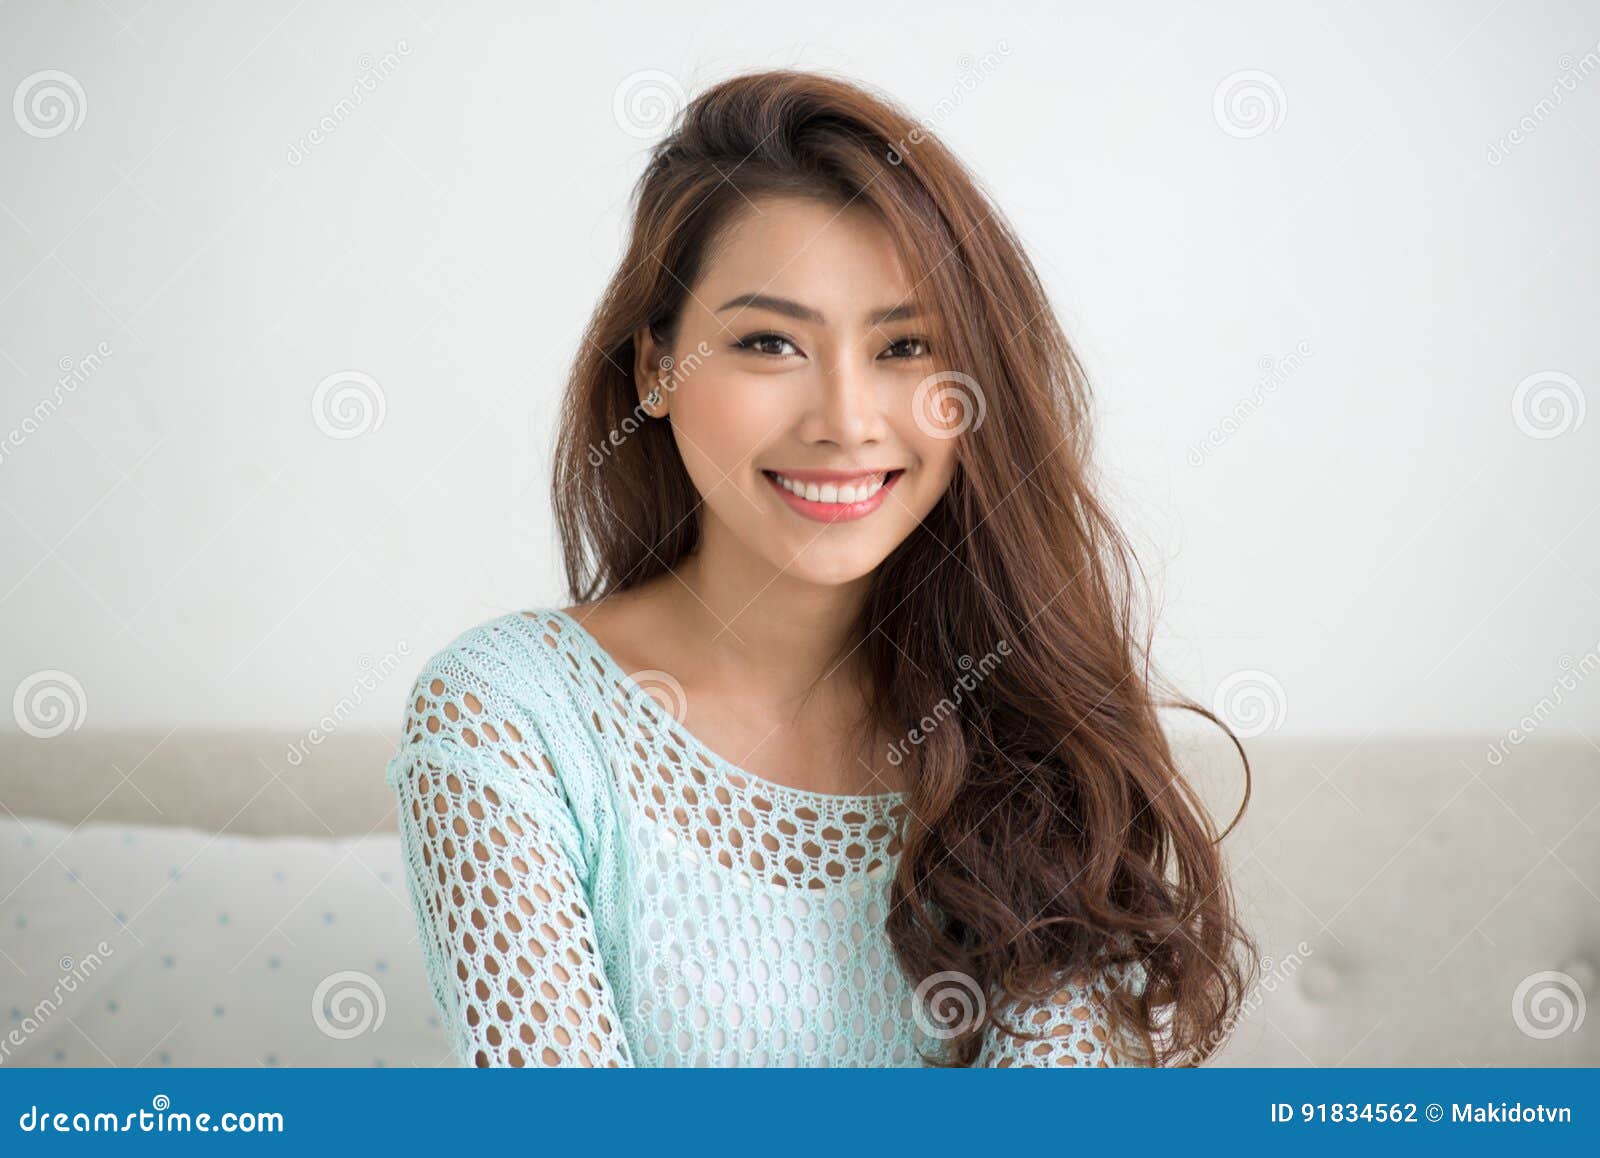 Asian Woman Using Smartphone Sitting on Couch Stock Photo - Image of ...